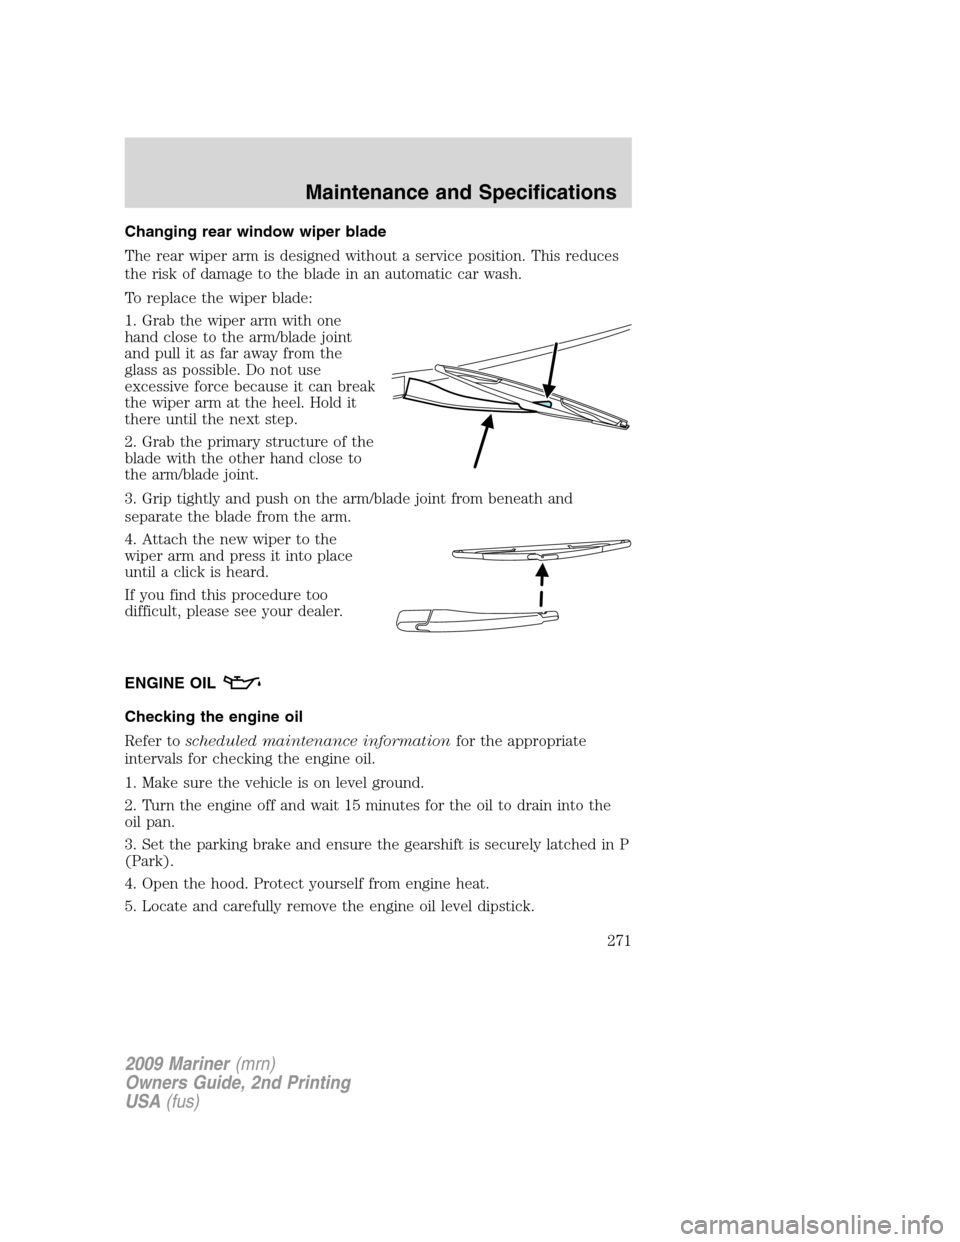 Mercury Mariner 2009  Owners Manuals Changing rear window wiper blade
The rear wiper arm is designed without a service position. This reduces
the risk of damage to the blade in an automatic car wash.
To replace the wiper blade:
1. Grab t